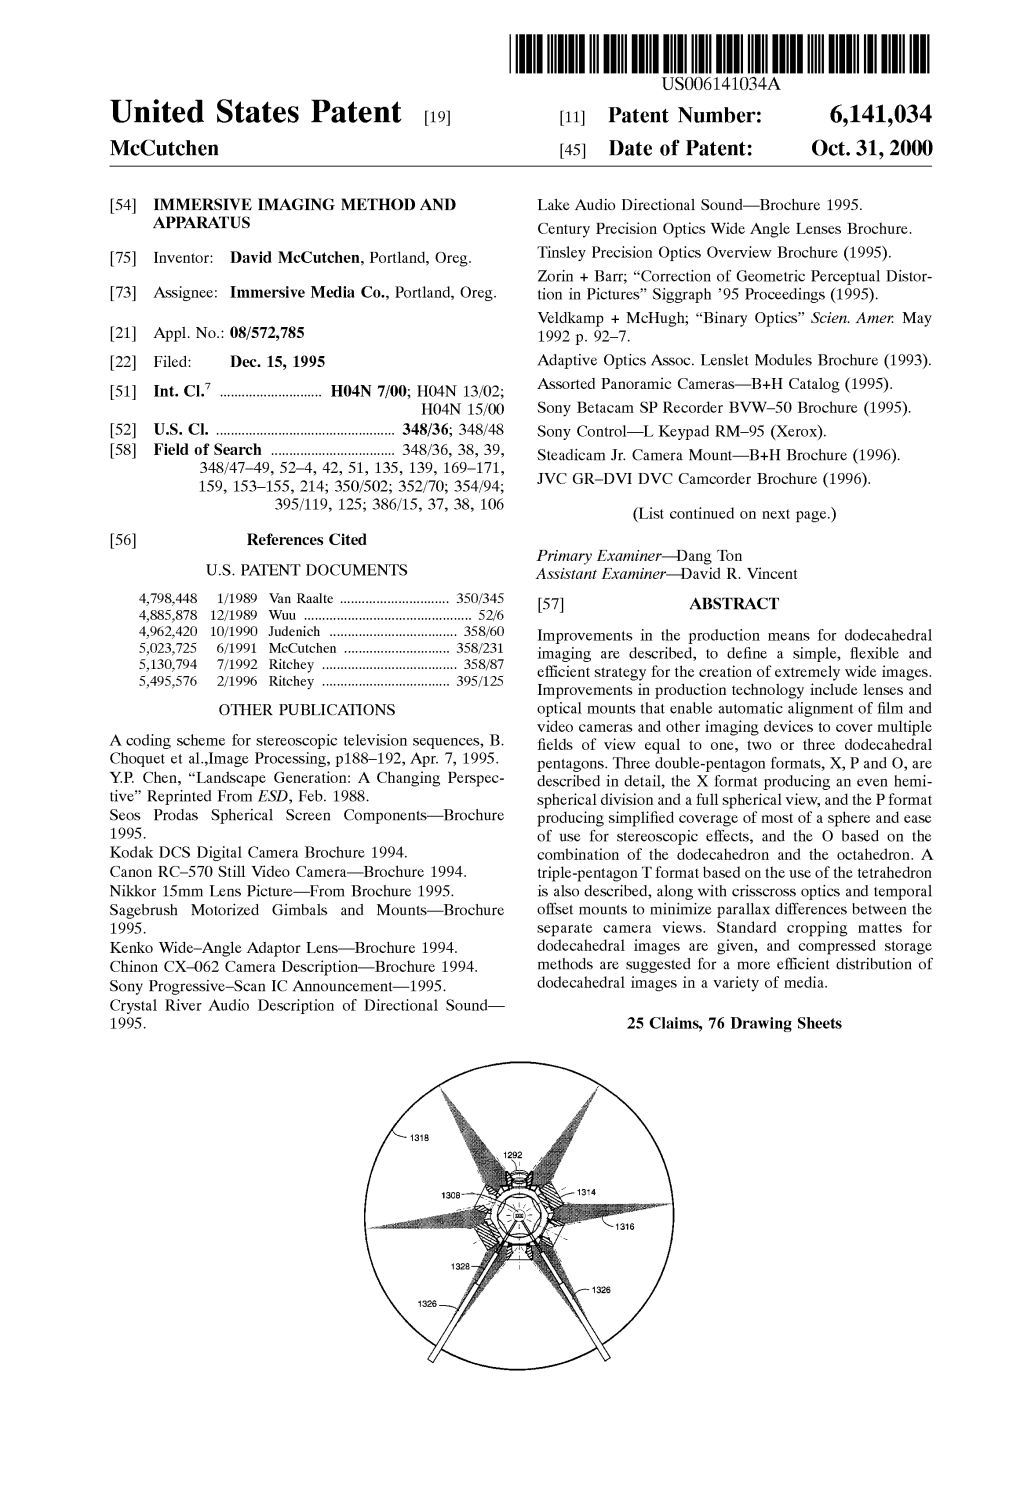 United States Patent (19) 11 Patent Number: 6,141,034 Mccutchen (45) Date of Patent: Oct